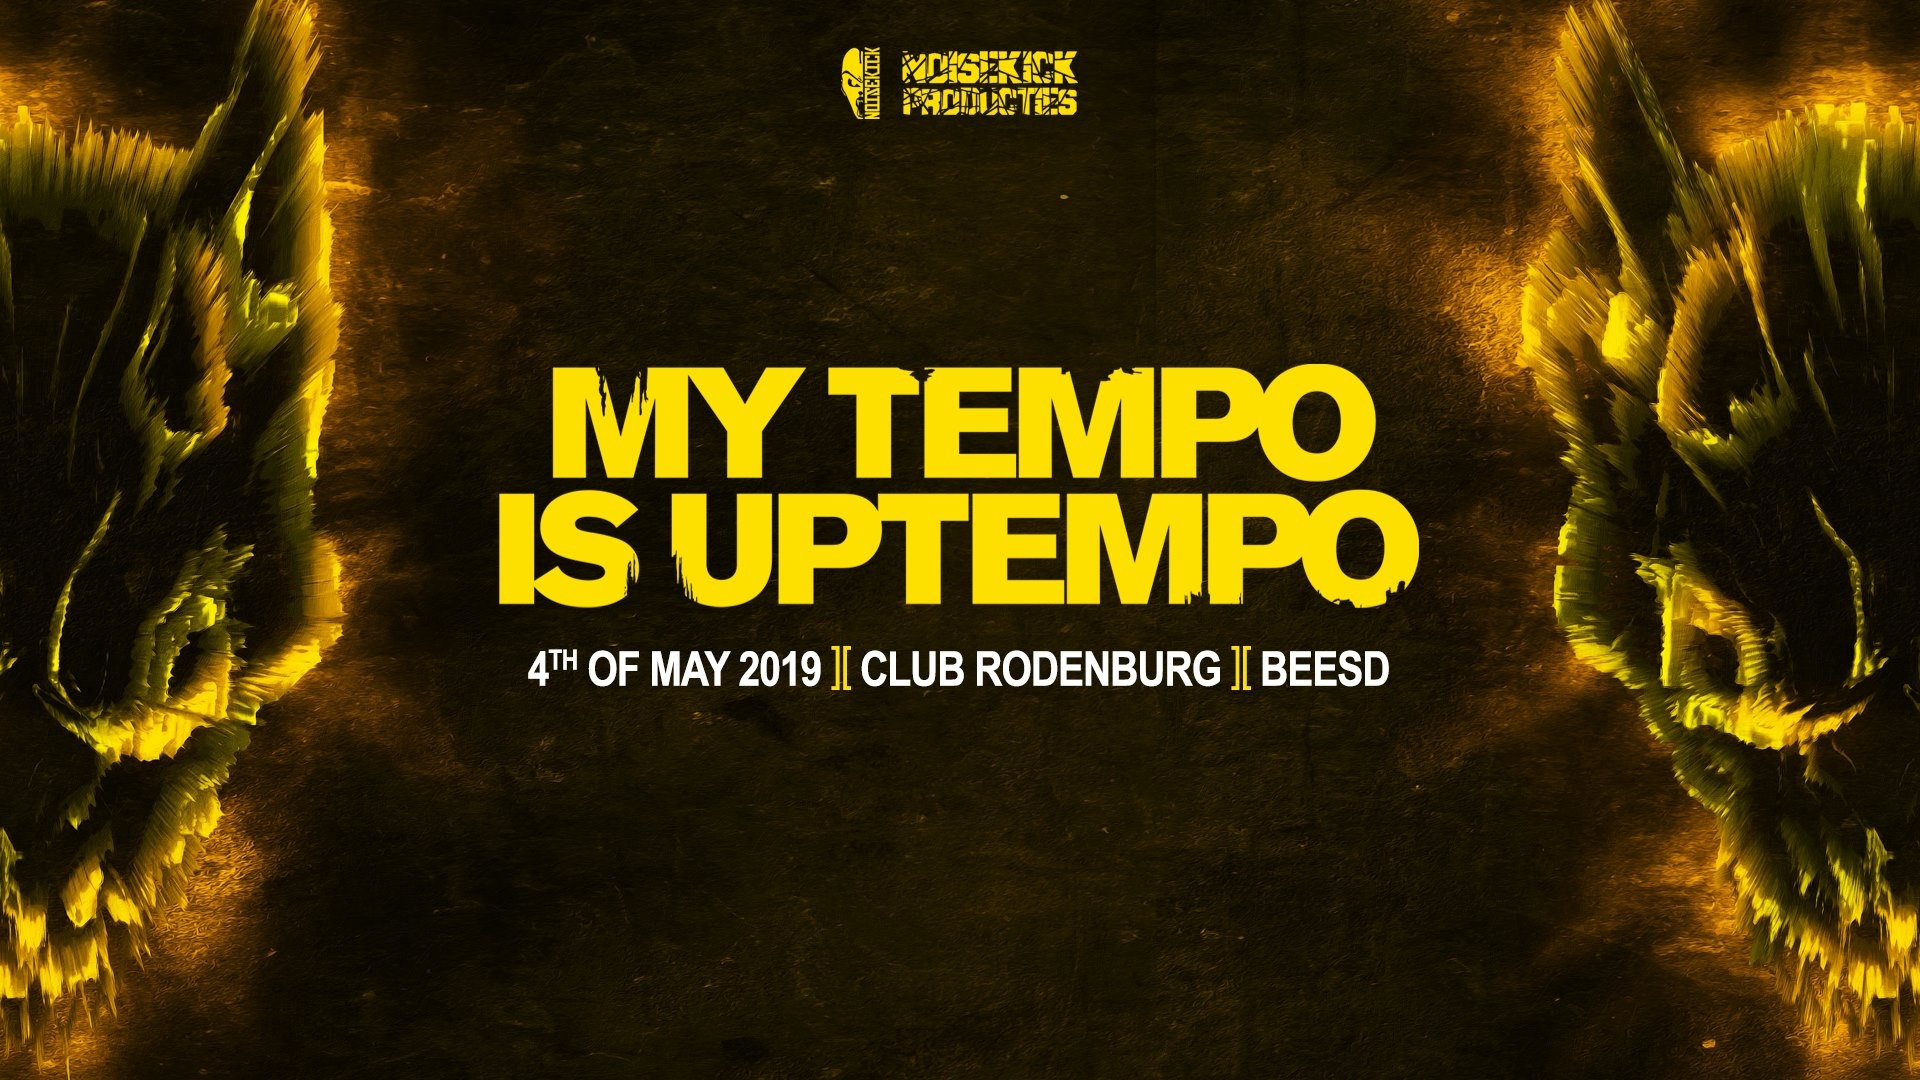 My tempo is uptempo 2019